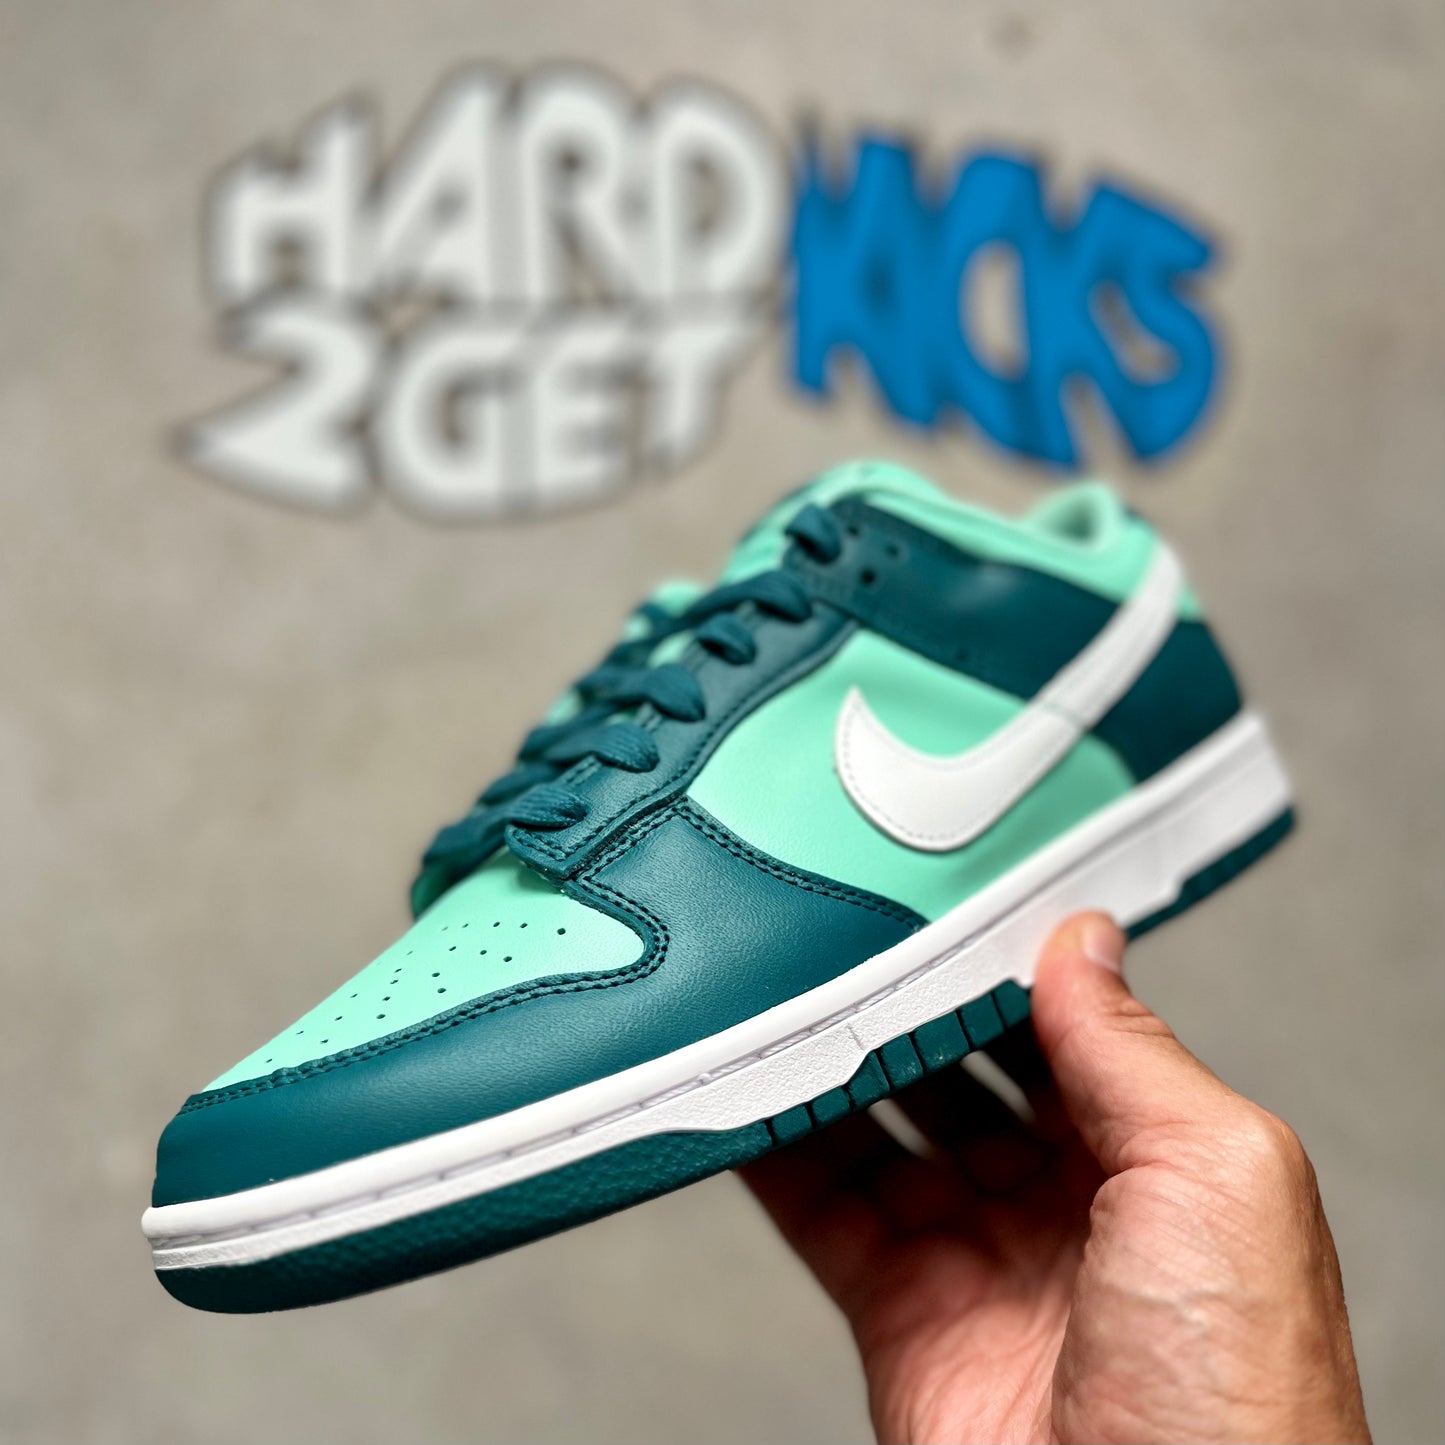 Wmns Nike Dunk Low - Geode Teal